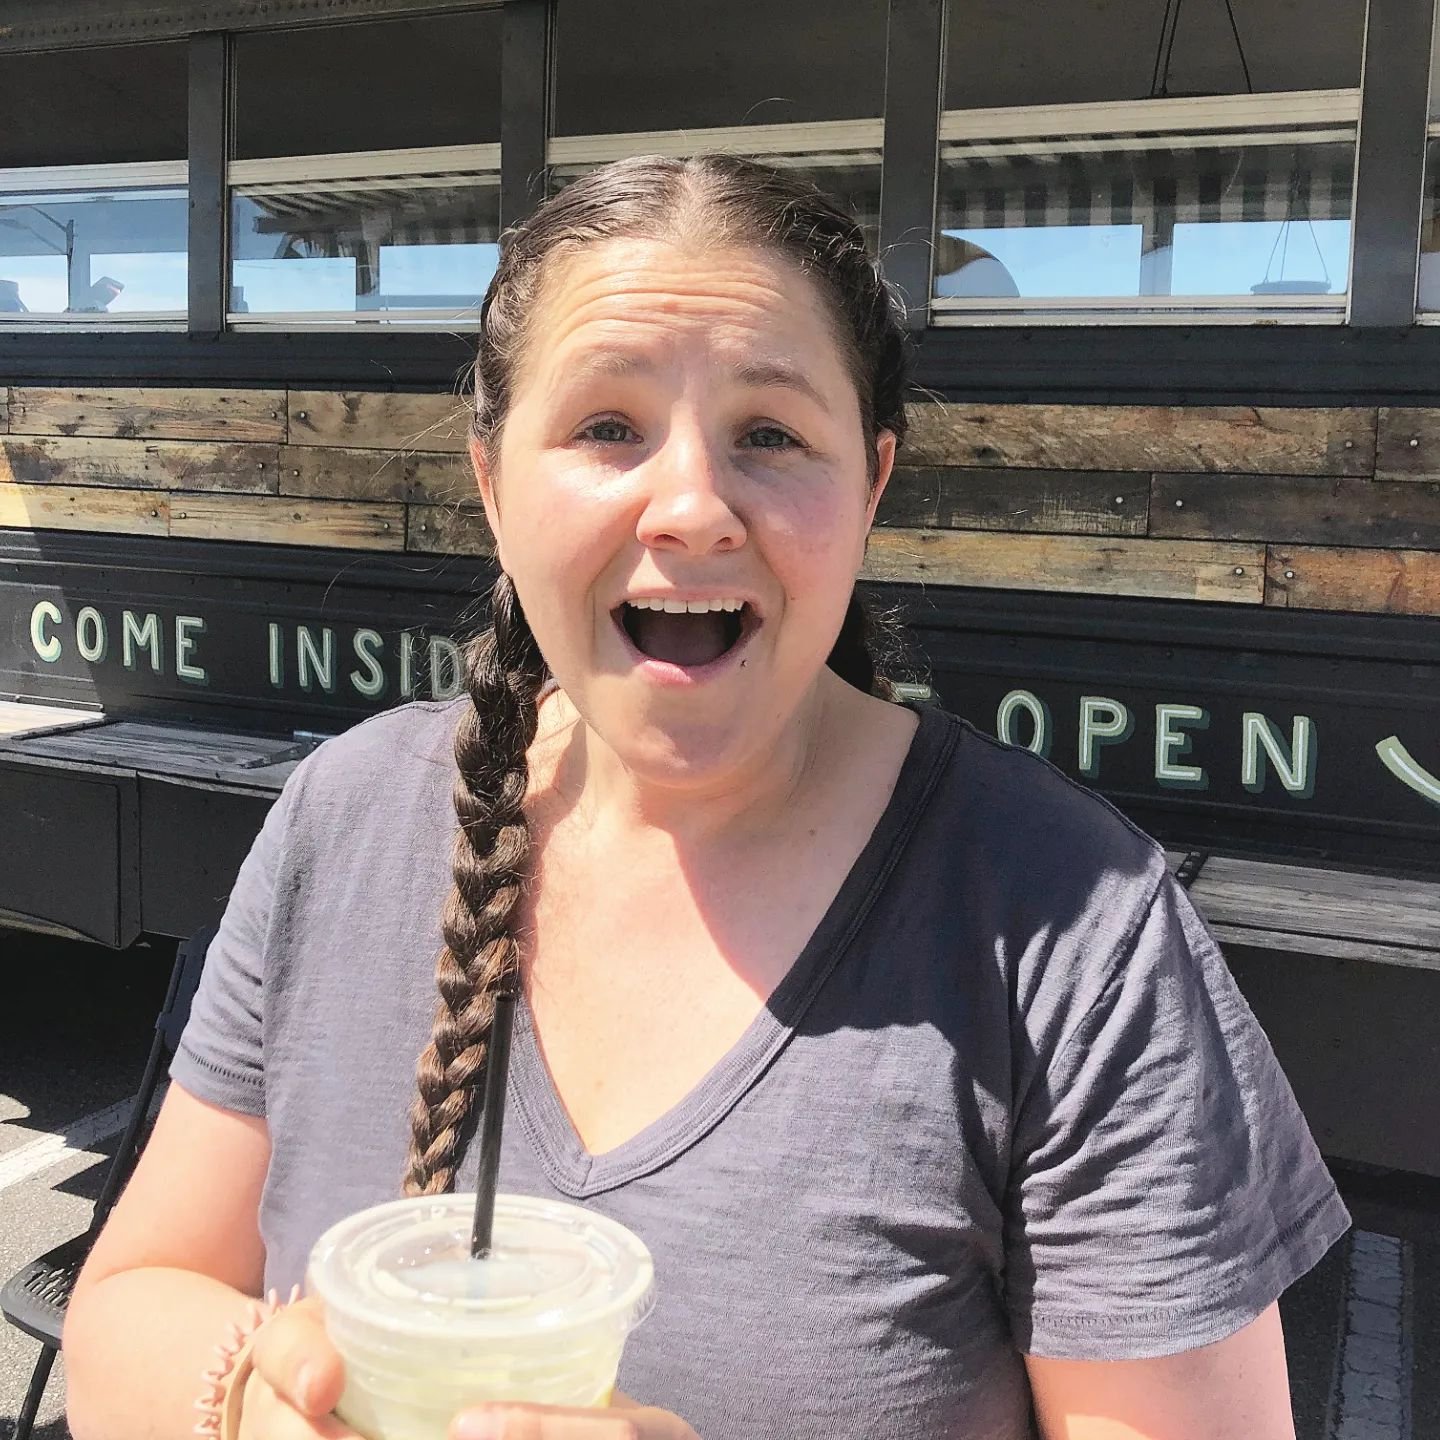 Hop on the bus and you might meet Jennifer. Jennifer is the best friend everyone wishes for. Her vivacious energy and optimistic outlook lifts the spirits of all. Next time you see Jennifer, ask about the snake oil.
.
Happy #friendfriday